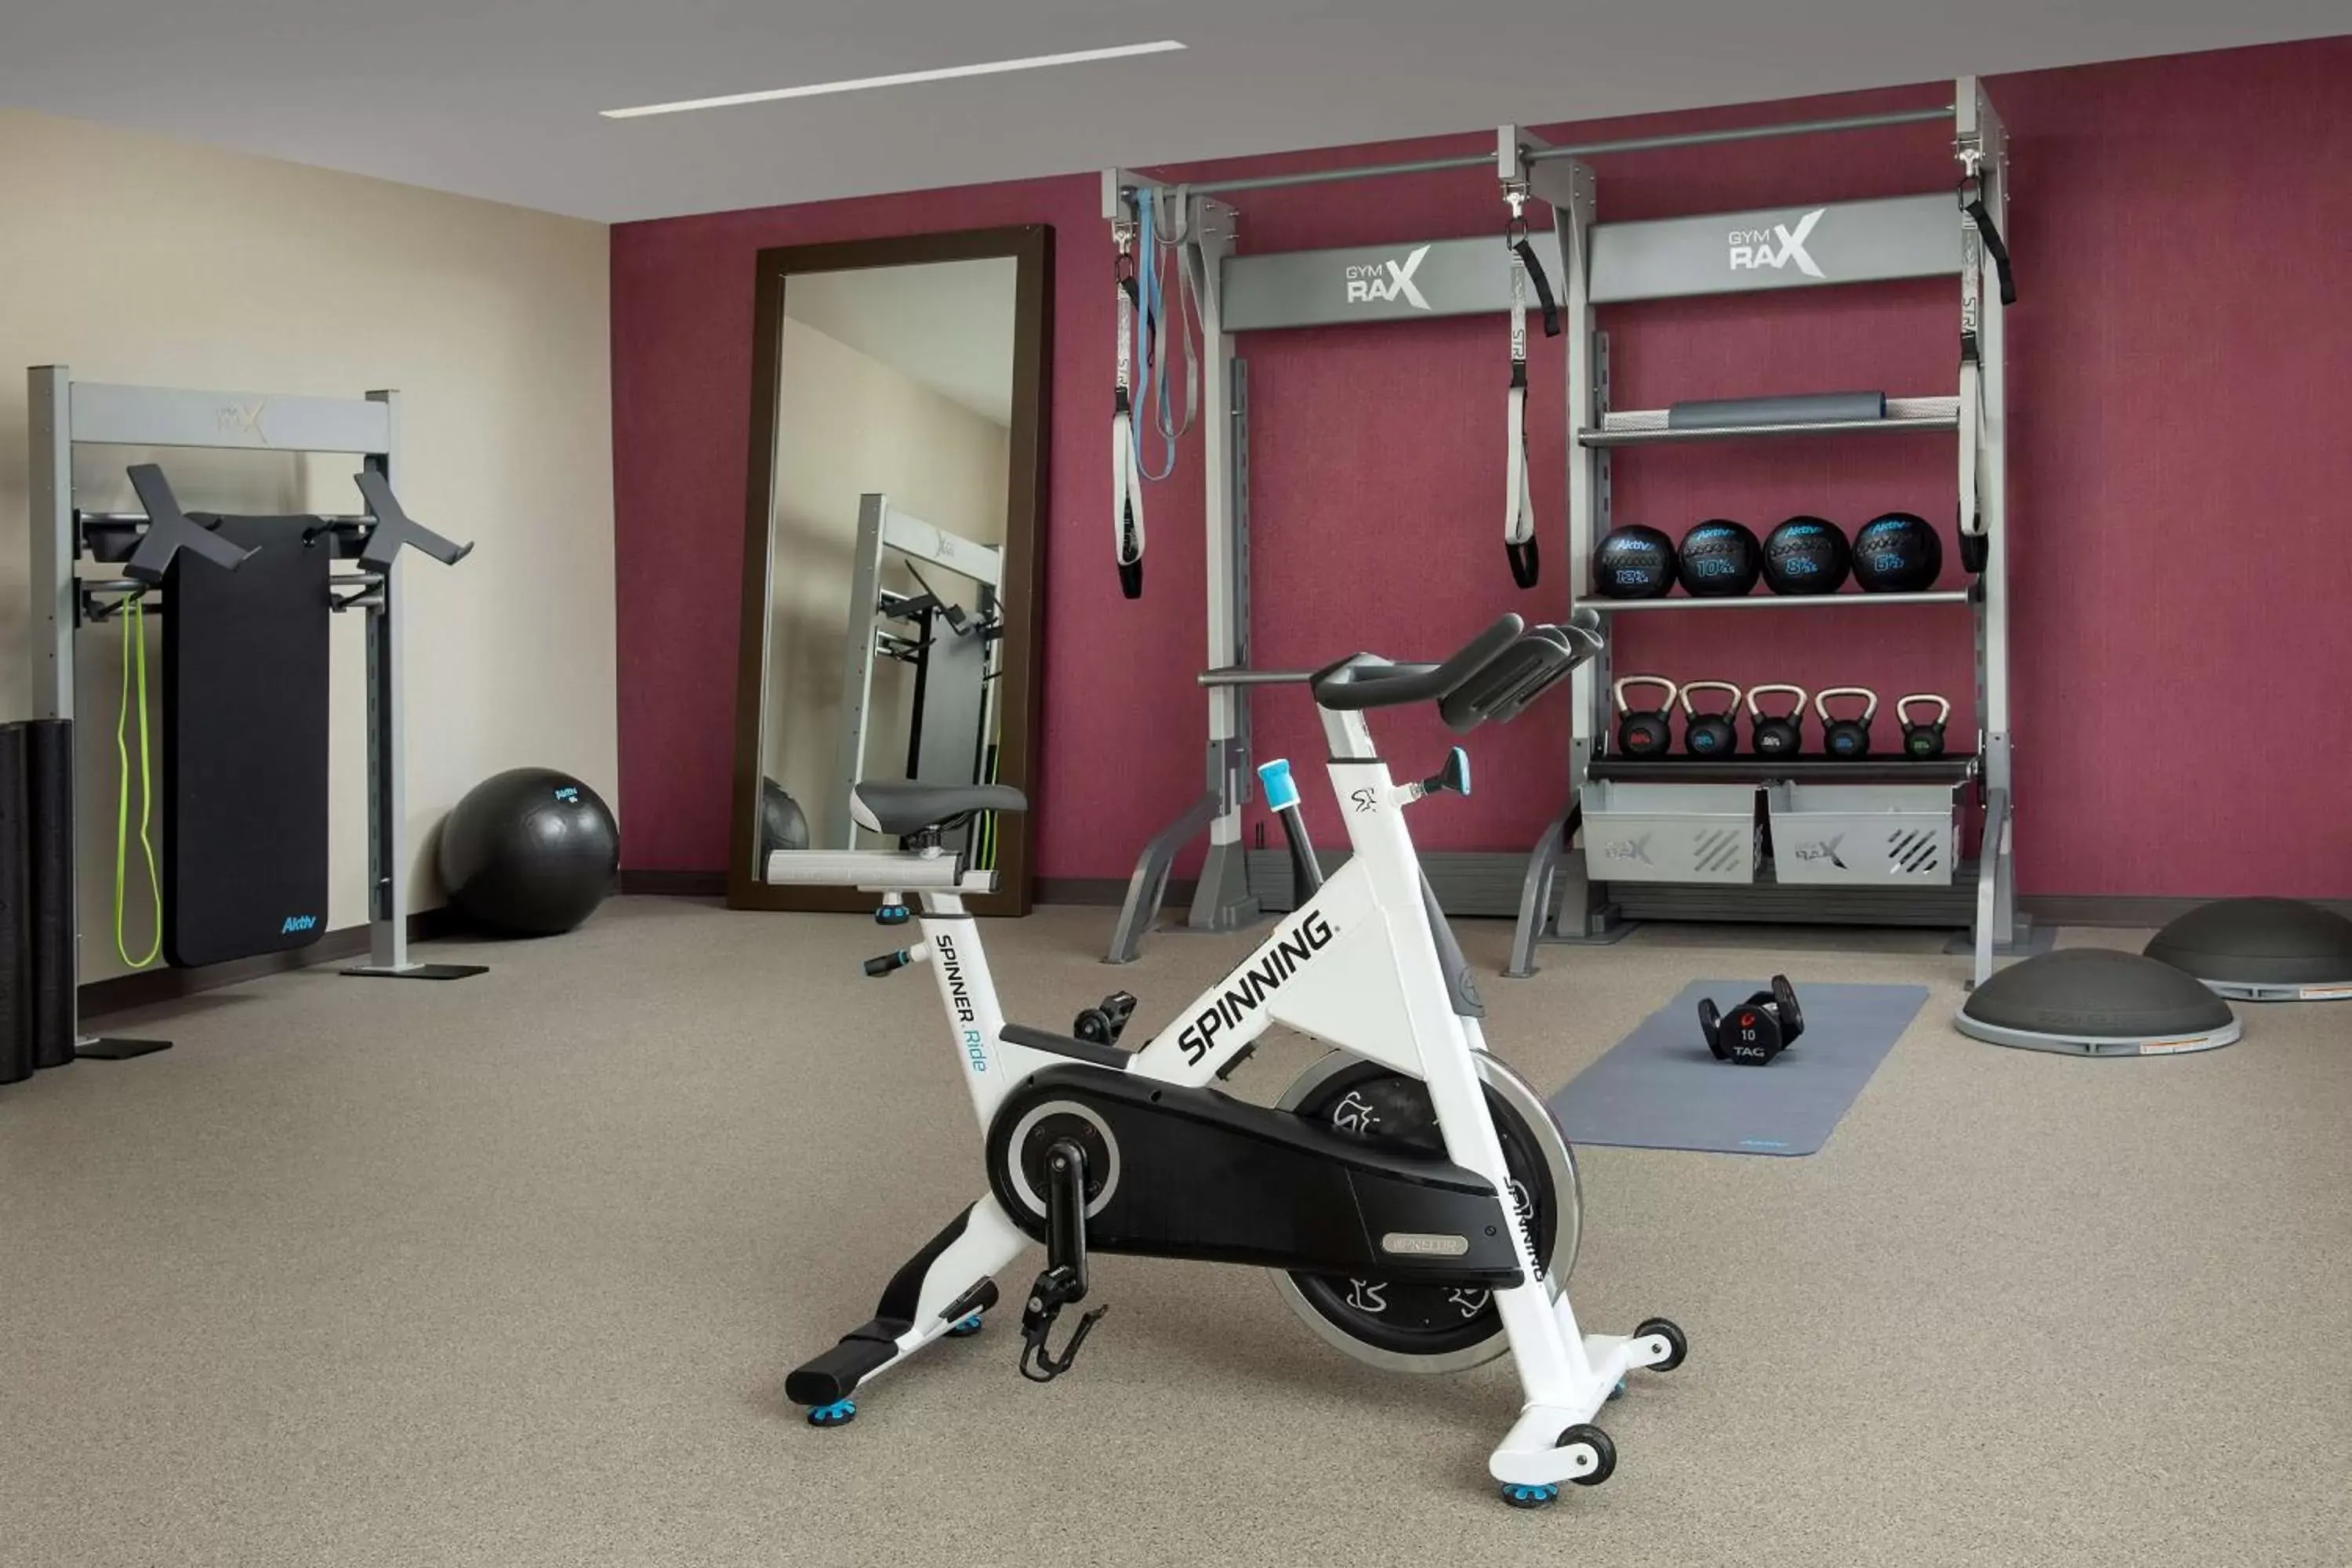 Fitness centre/facilities, Fitness Center/Facilities in Home2 Suites by Hilton Orlando Downtown, FL